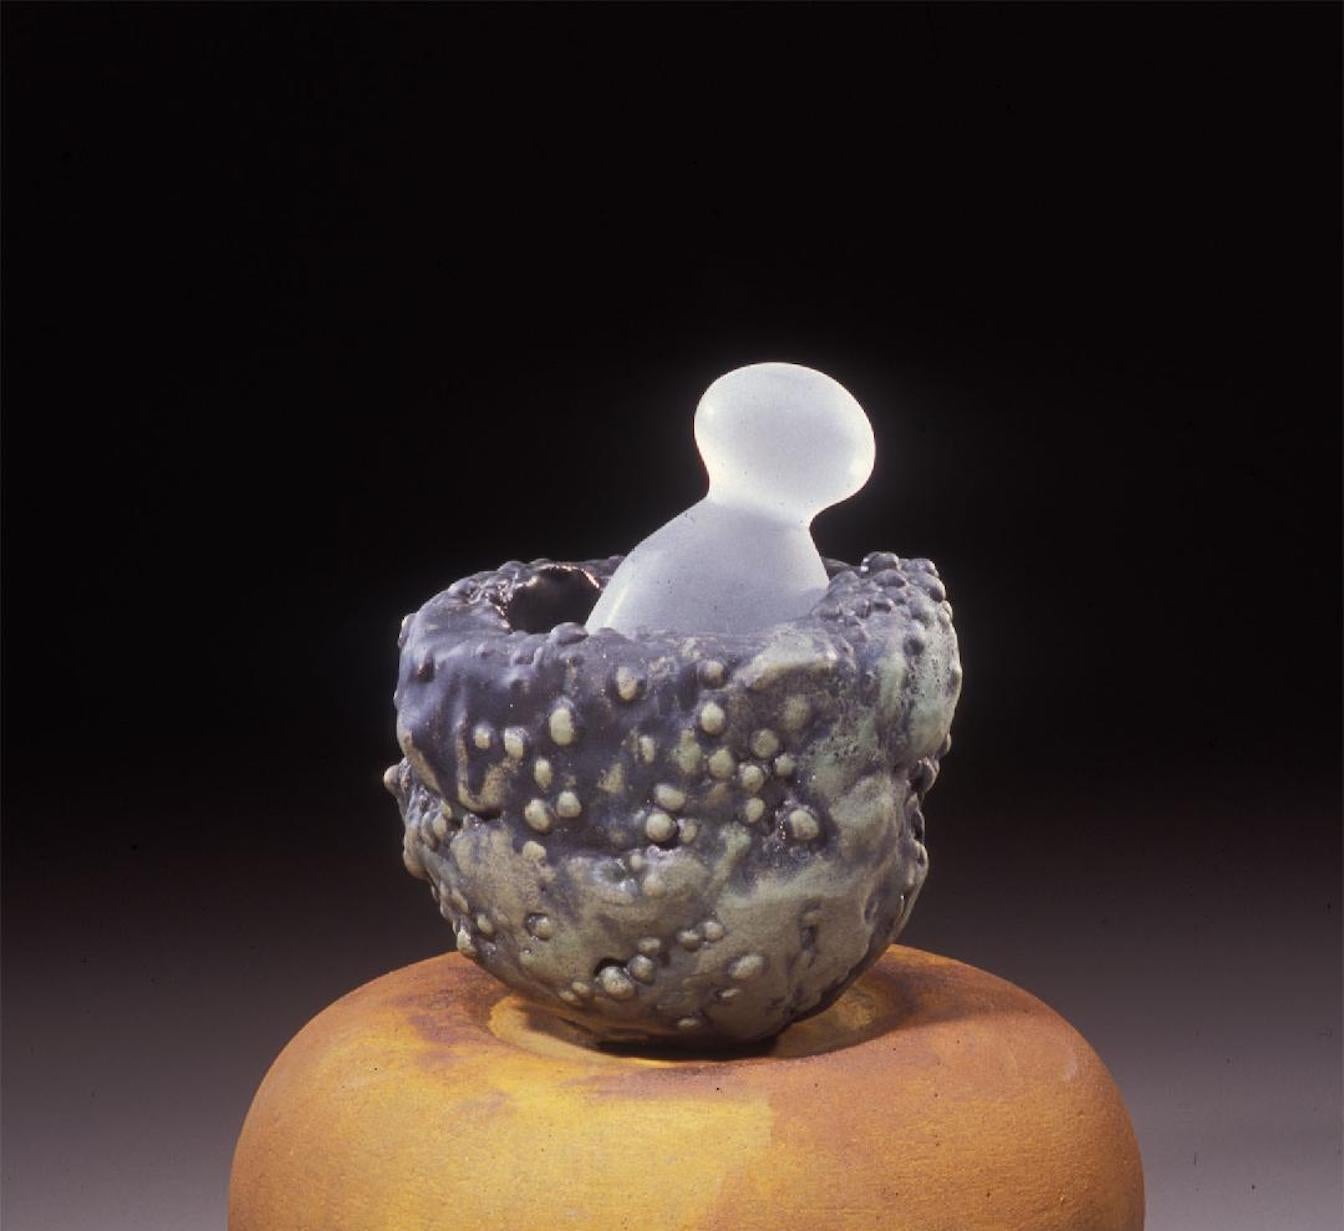 Richard Hirsch Ceramic Mortar and Glass Pestle Sculpture, 2007 In Excellent Condition For Sale In New York, NY